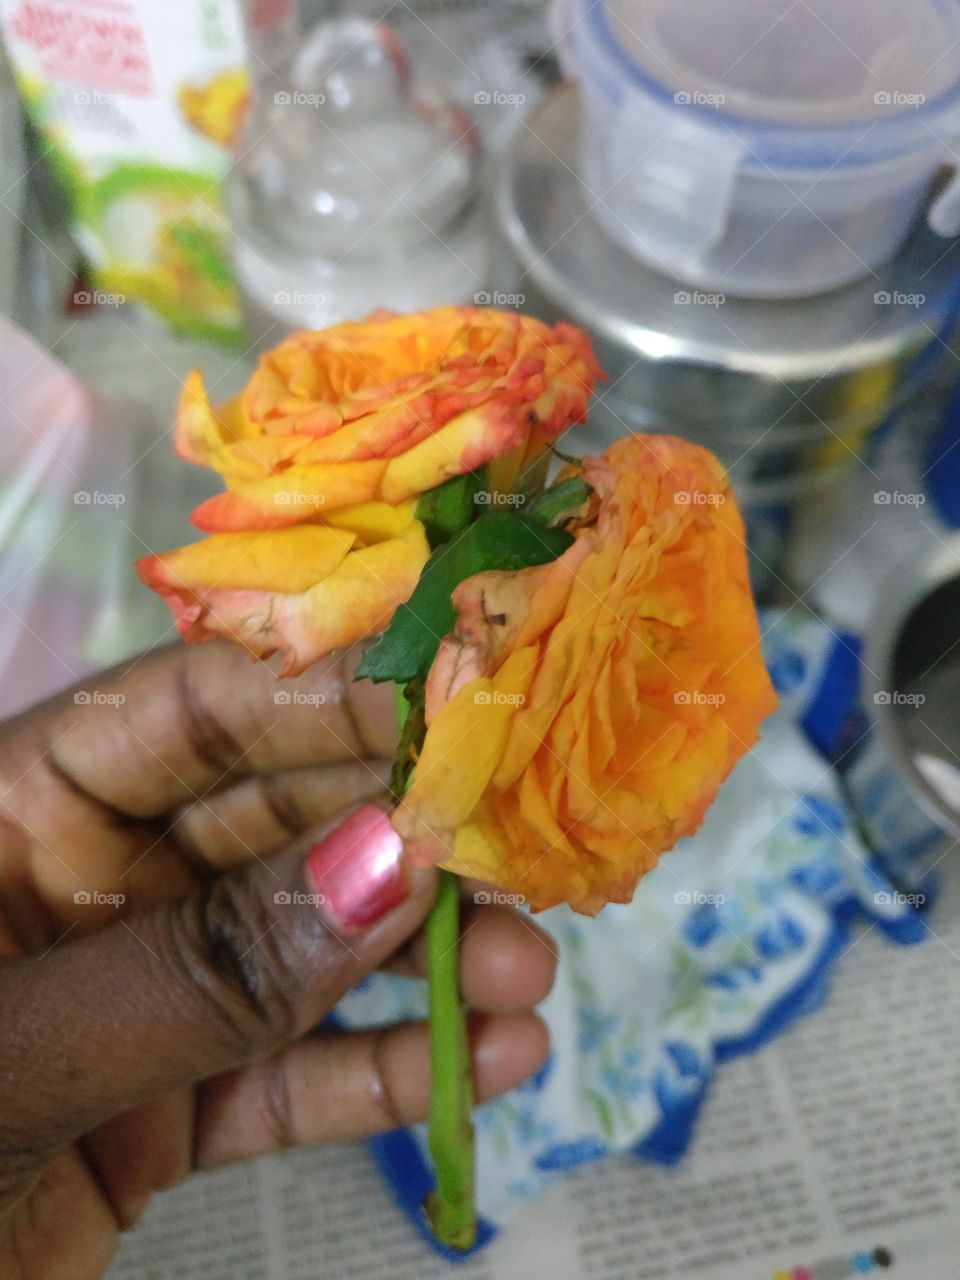 A rare thing.. 2 flowers on the same stalk